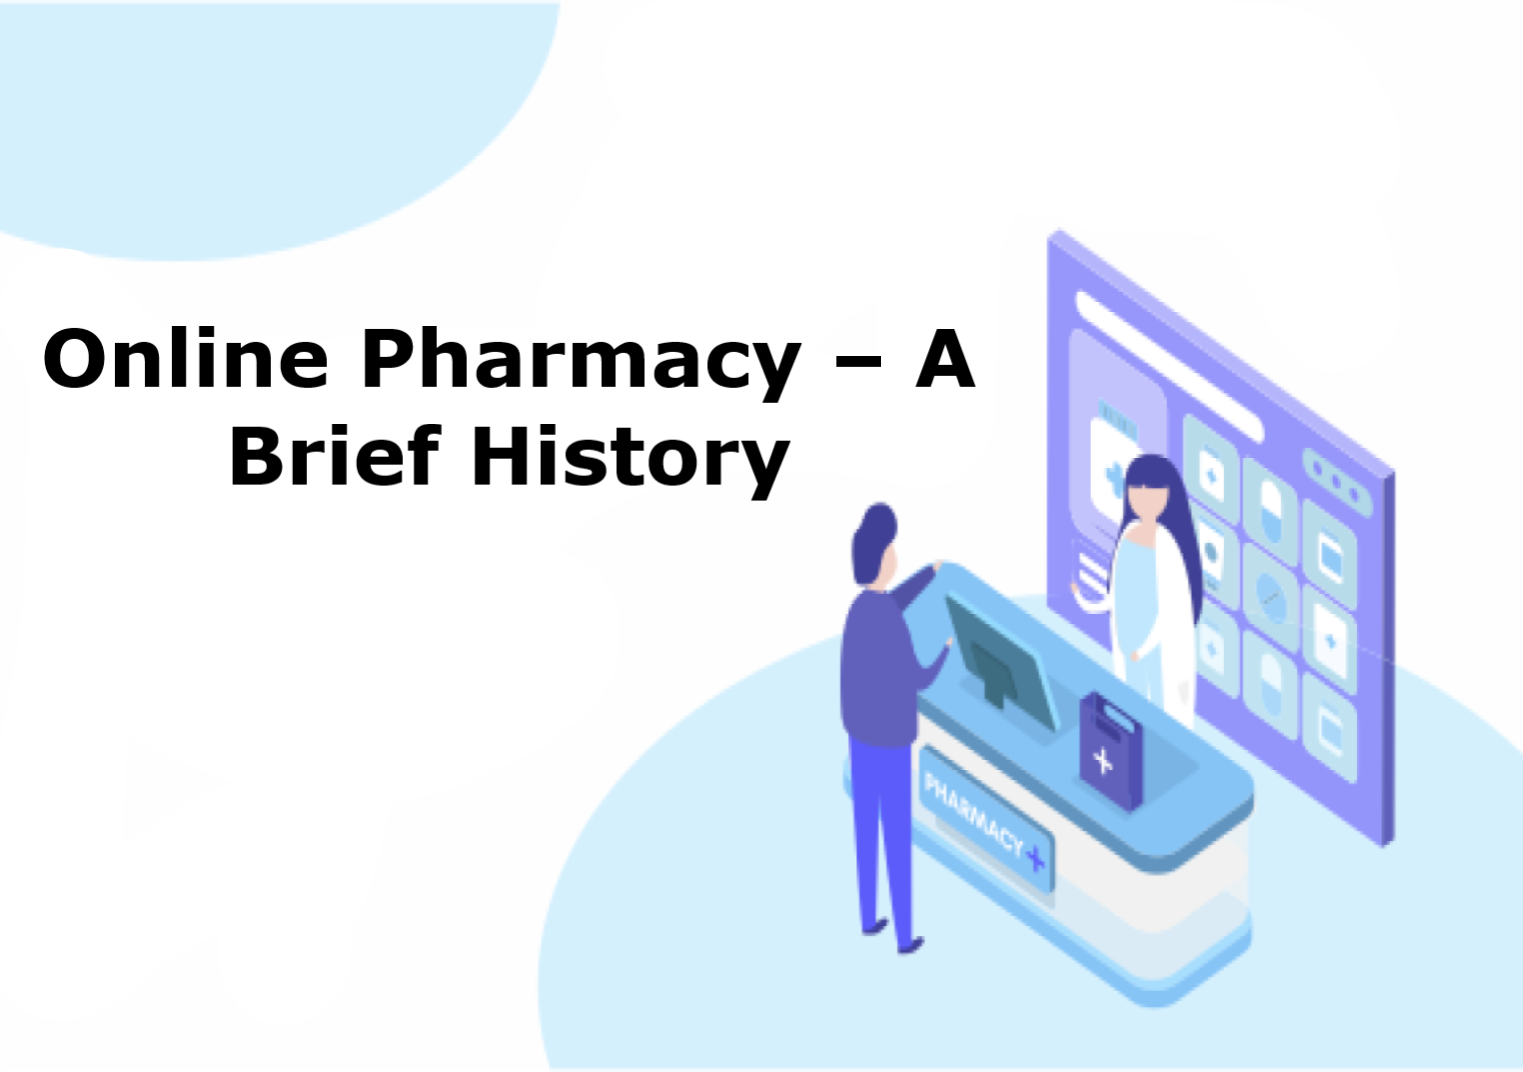 Read this before you go for online pharmacy business